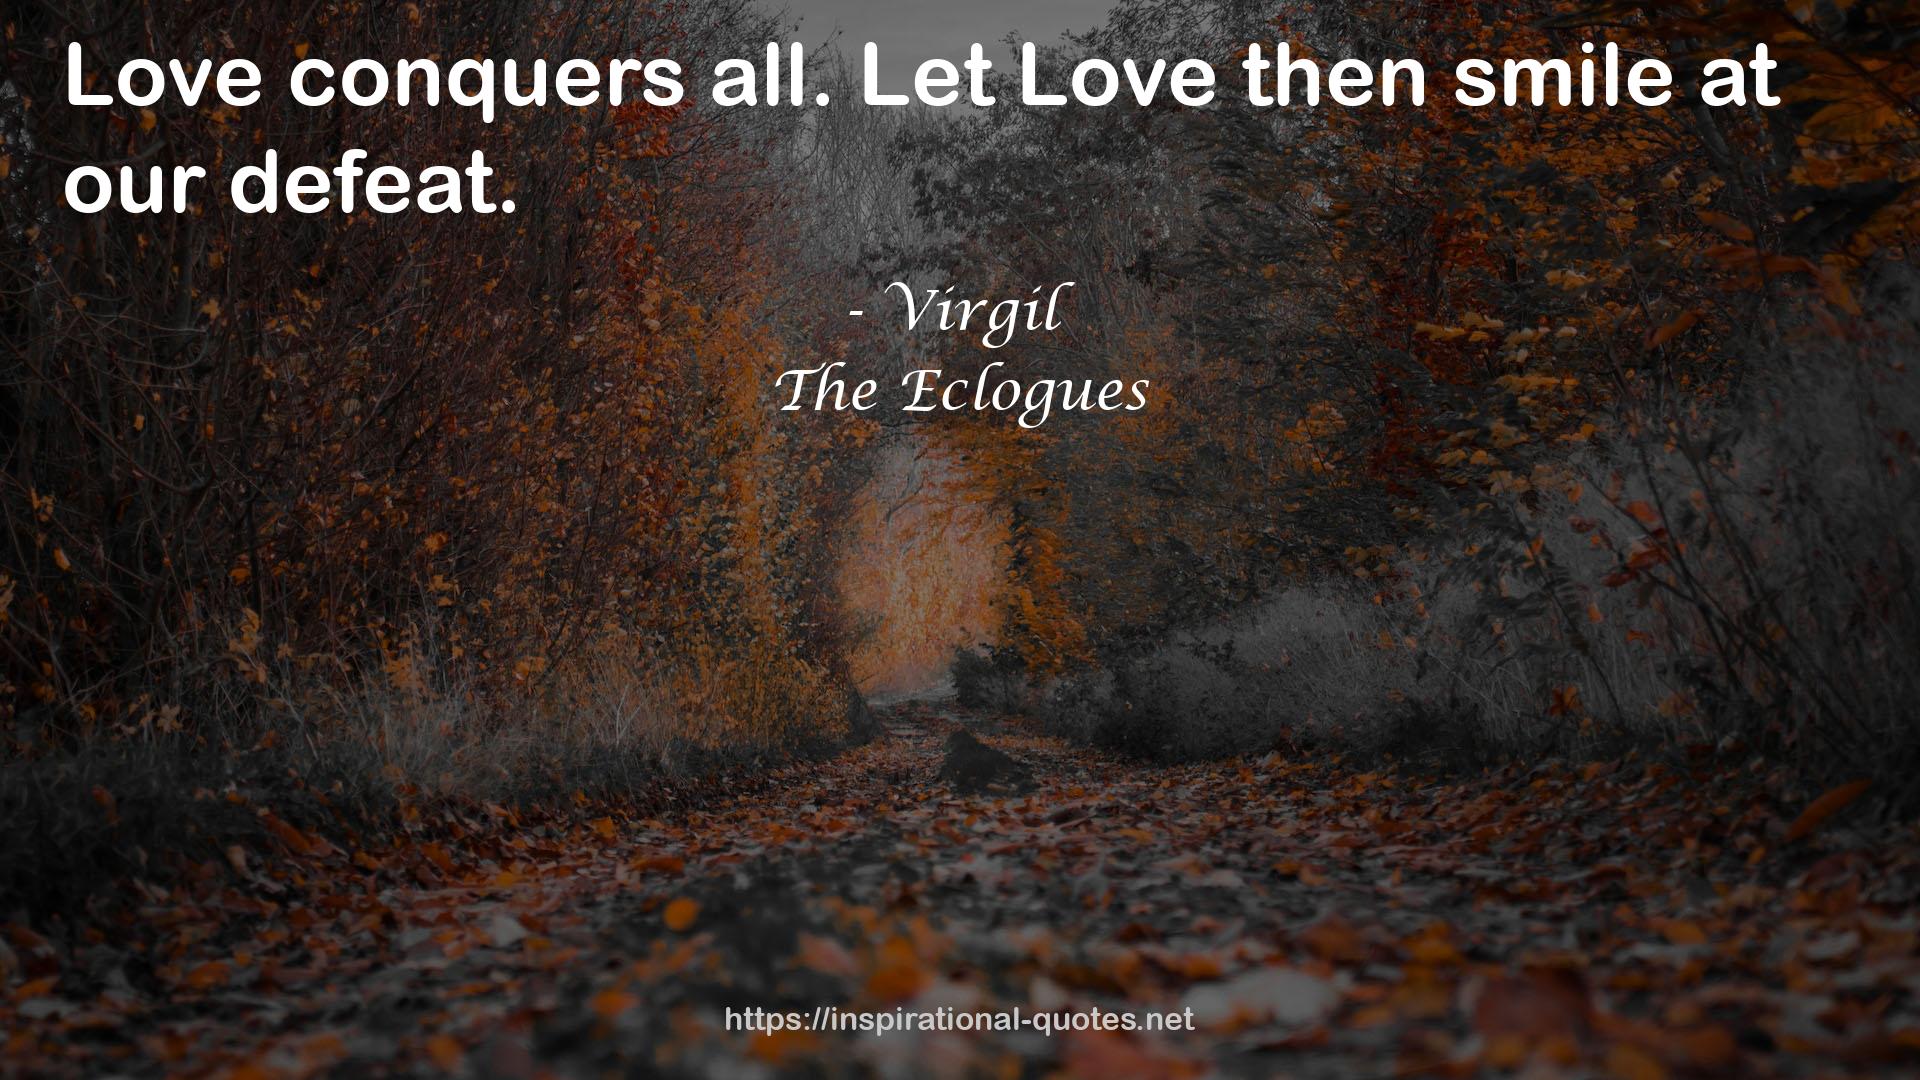 The Eclogues QUOTES